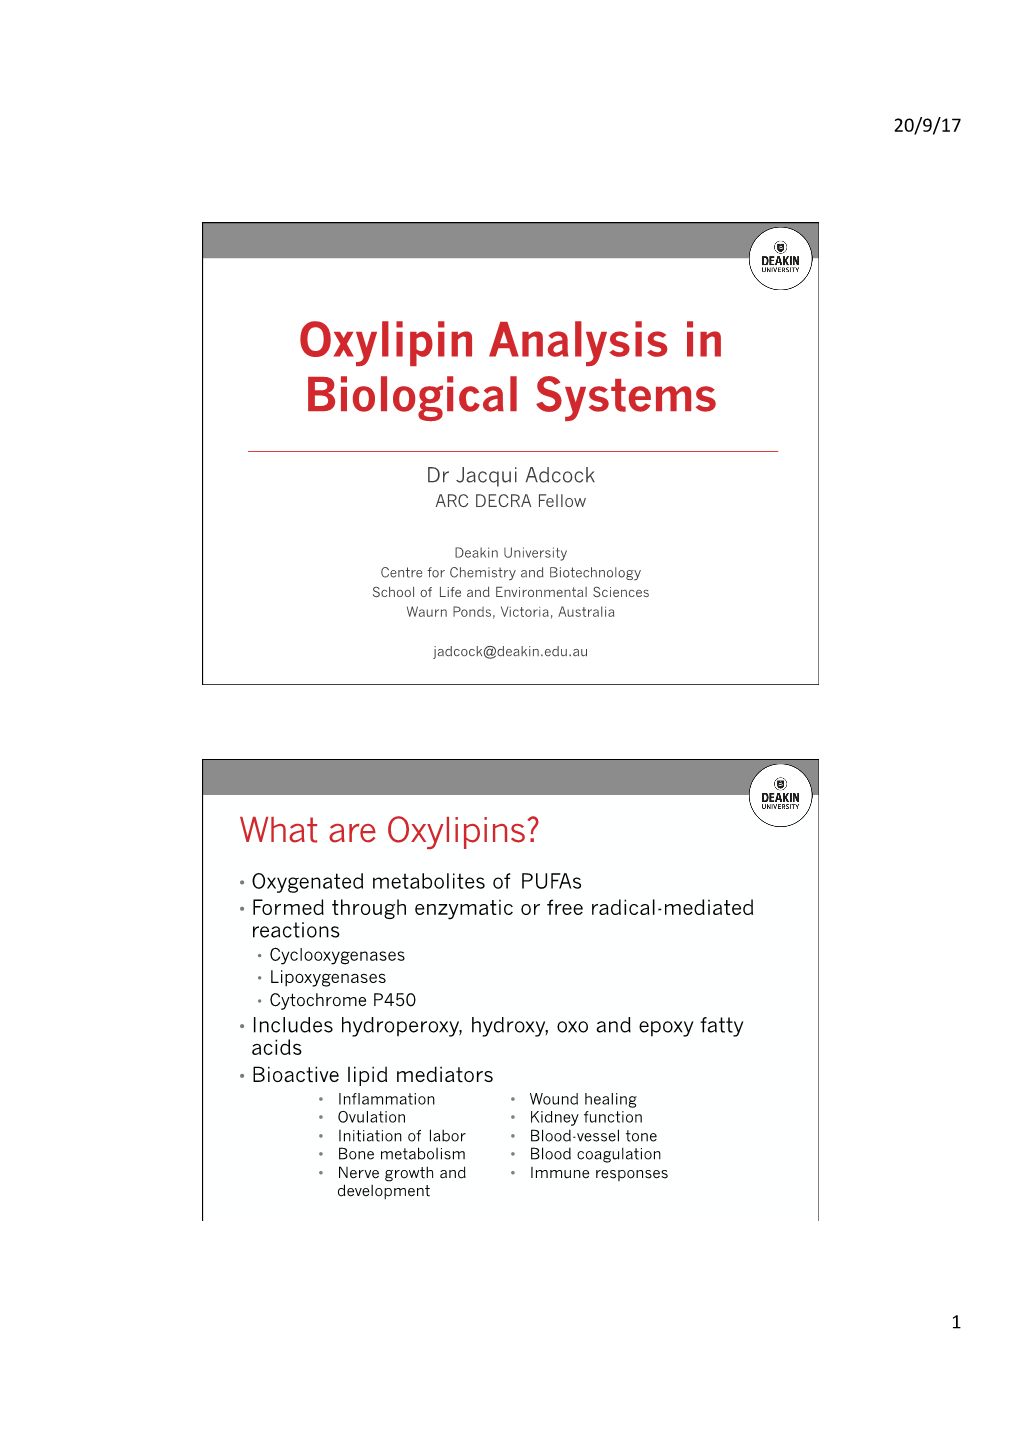 Oxylipin Analysis in Biological Systems